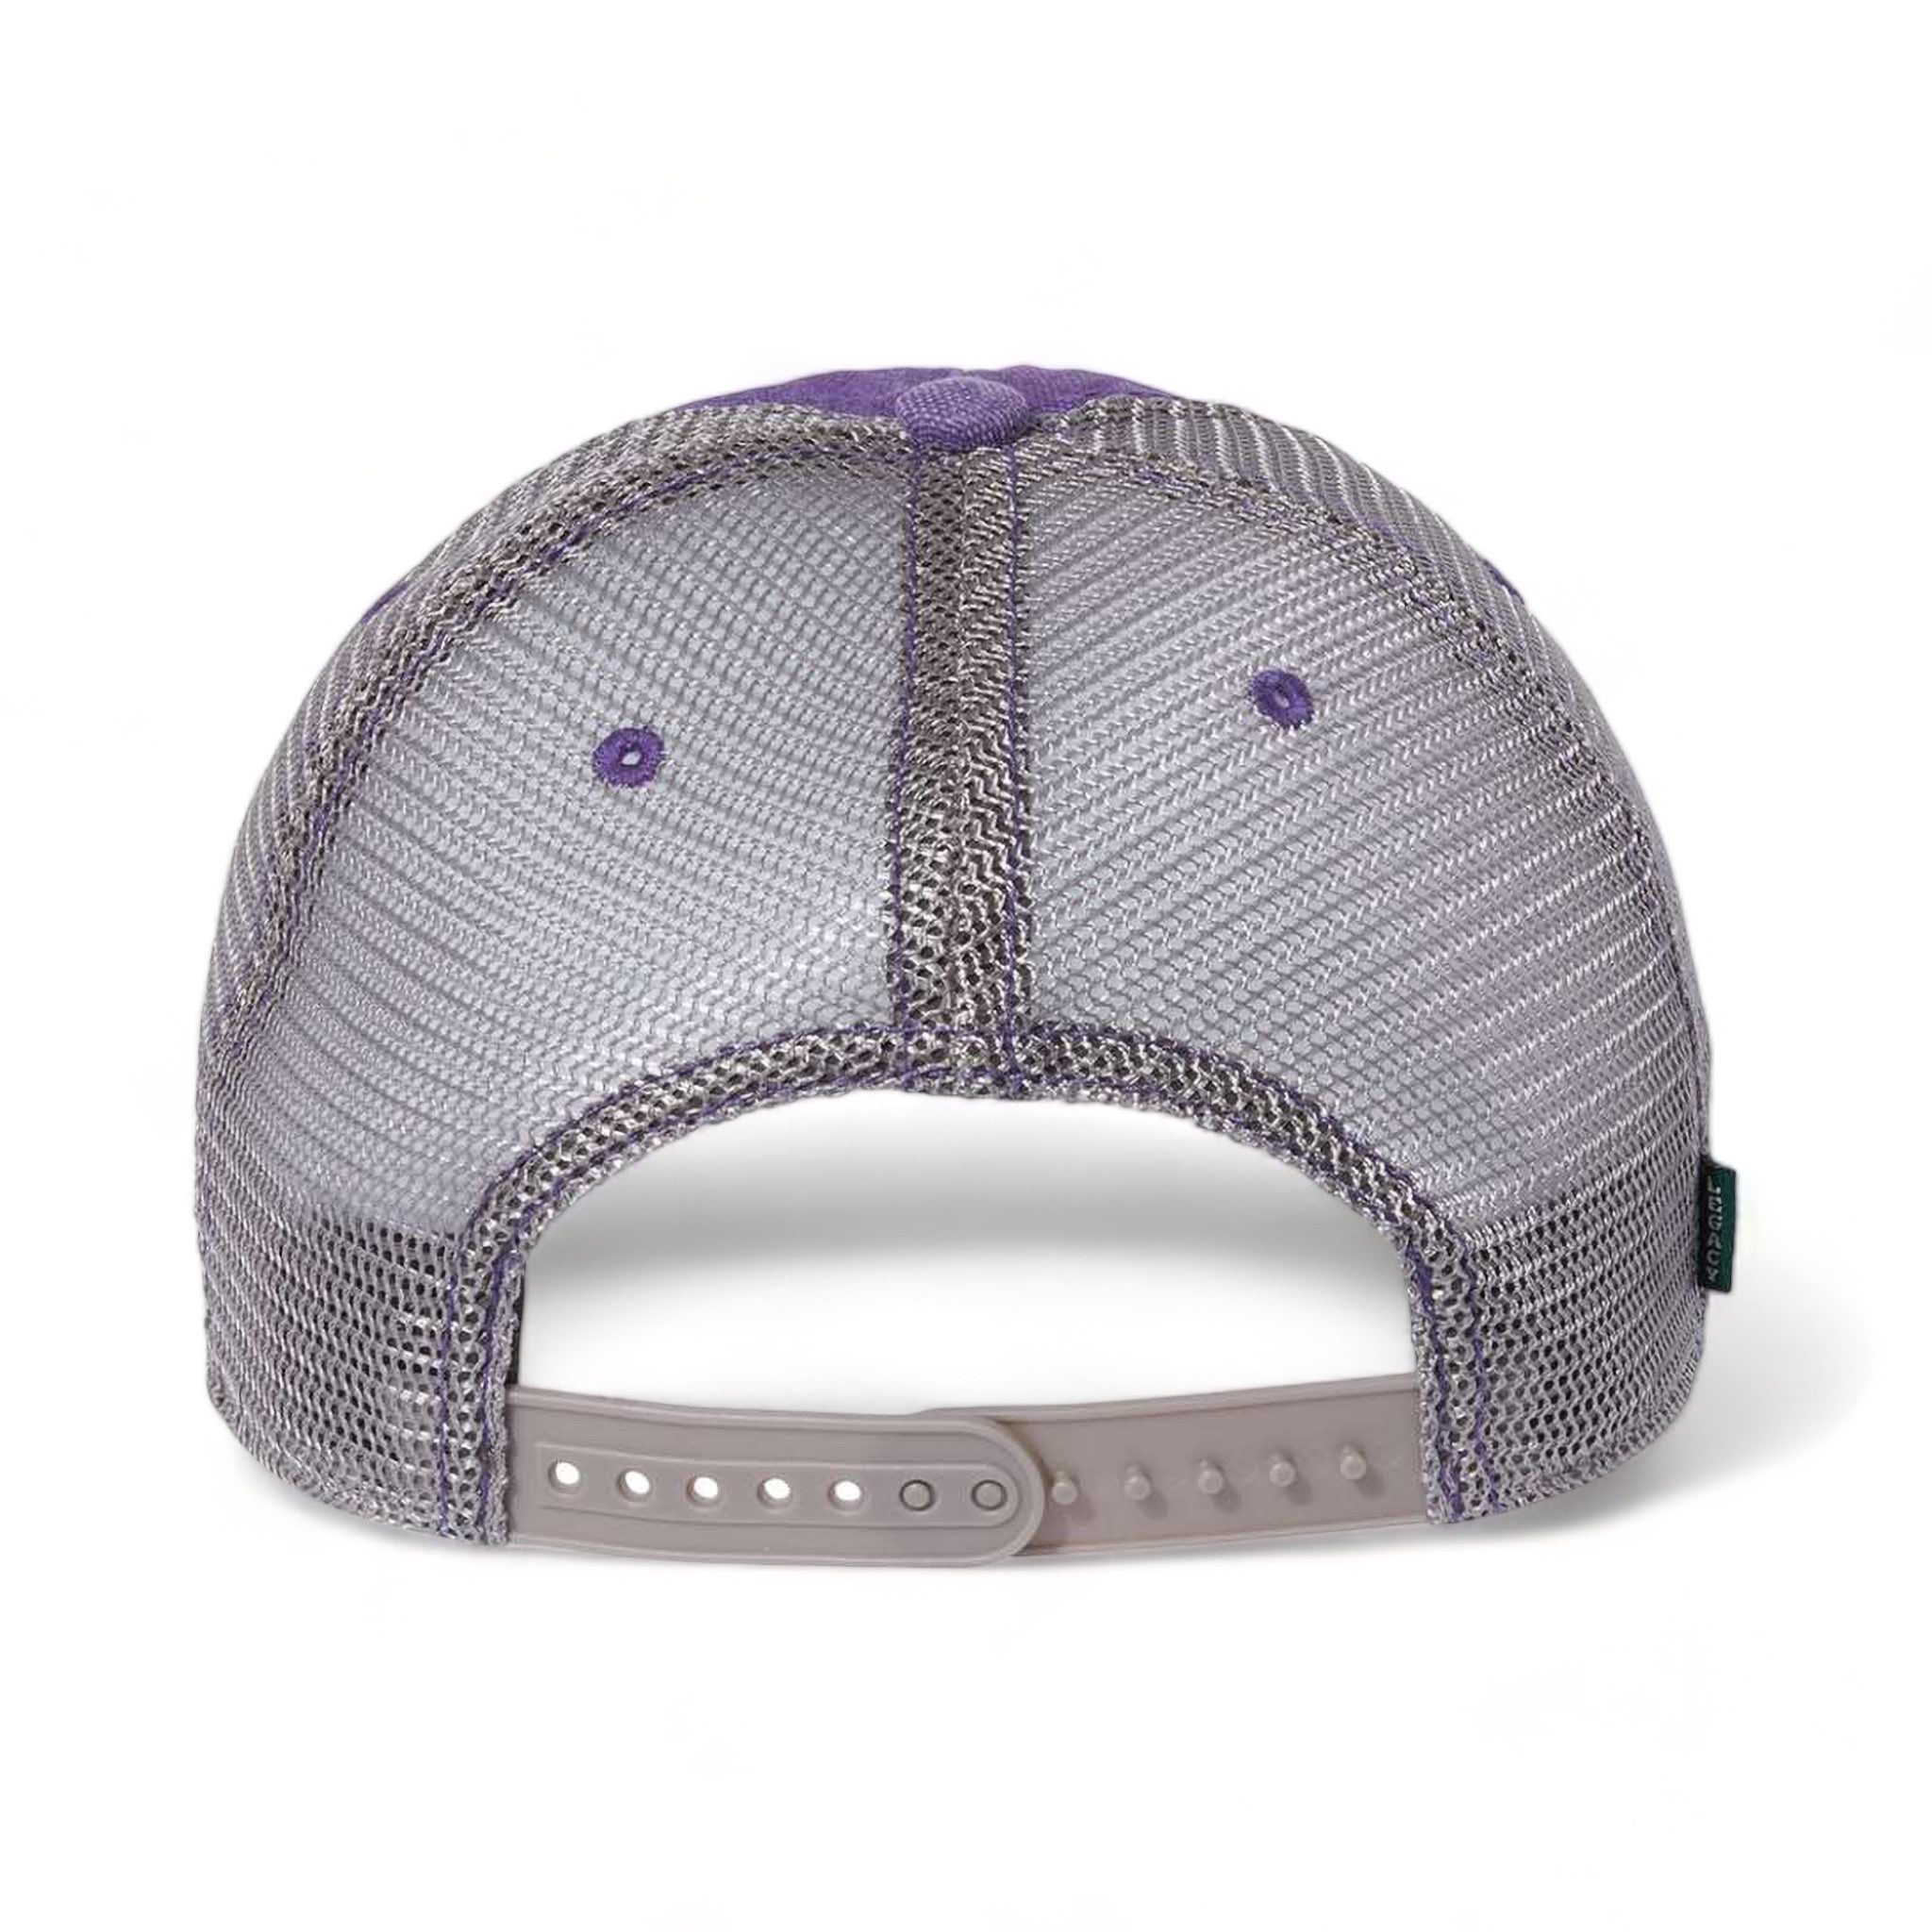 Back view of LEGACY DTA custom hat in purple and grey